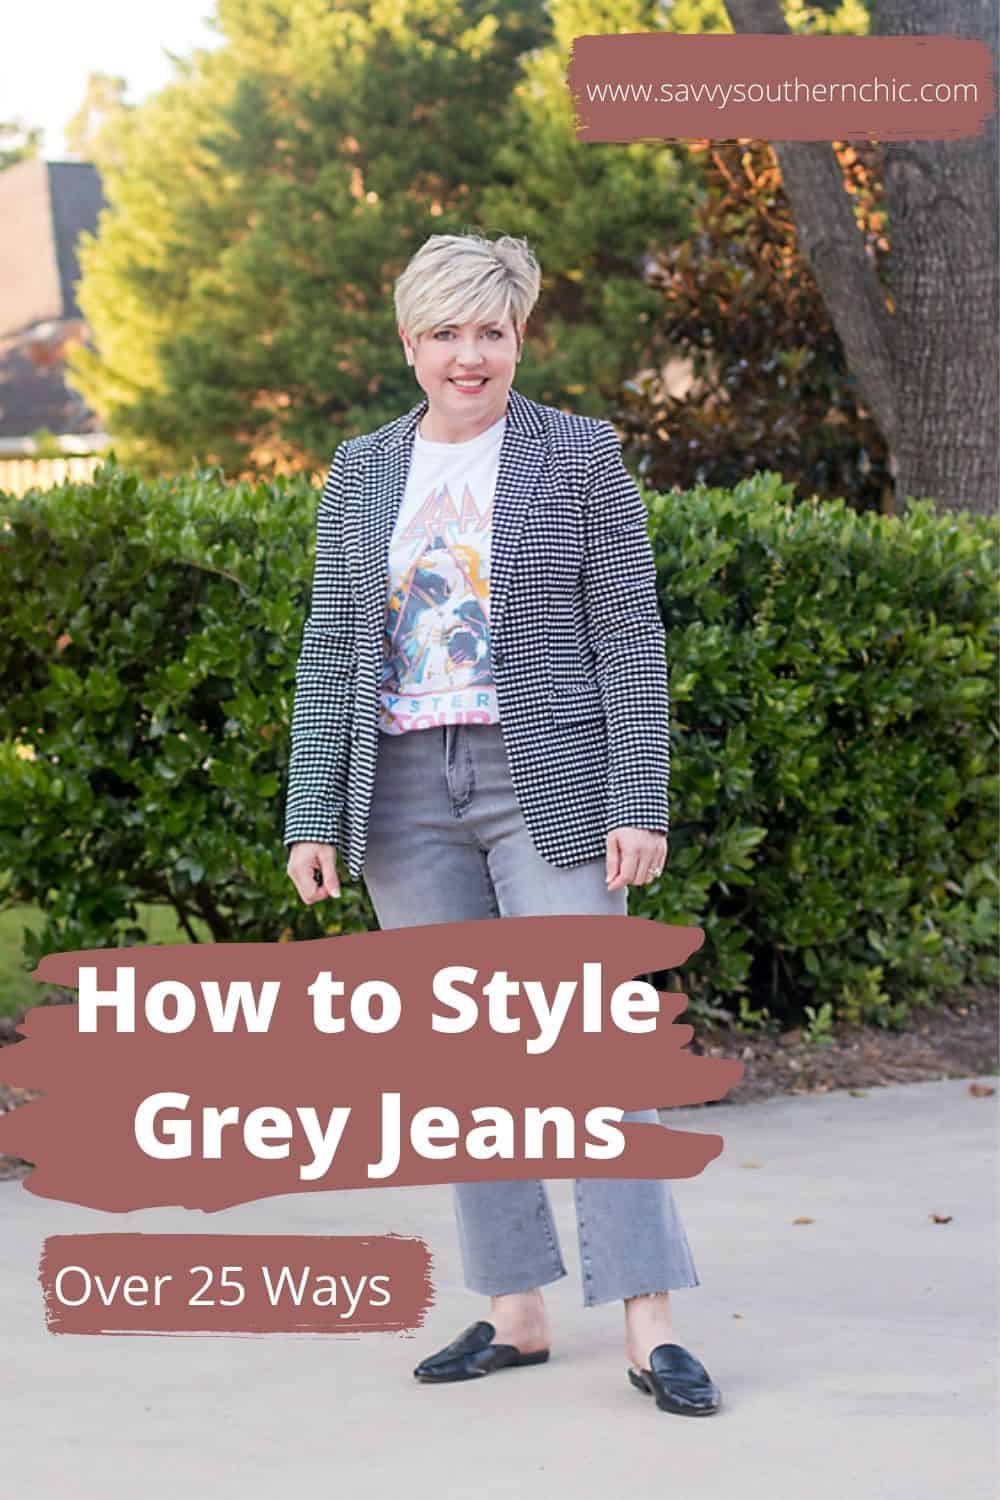 25 ways to style grey jeans